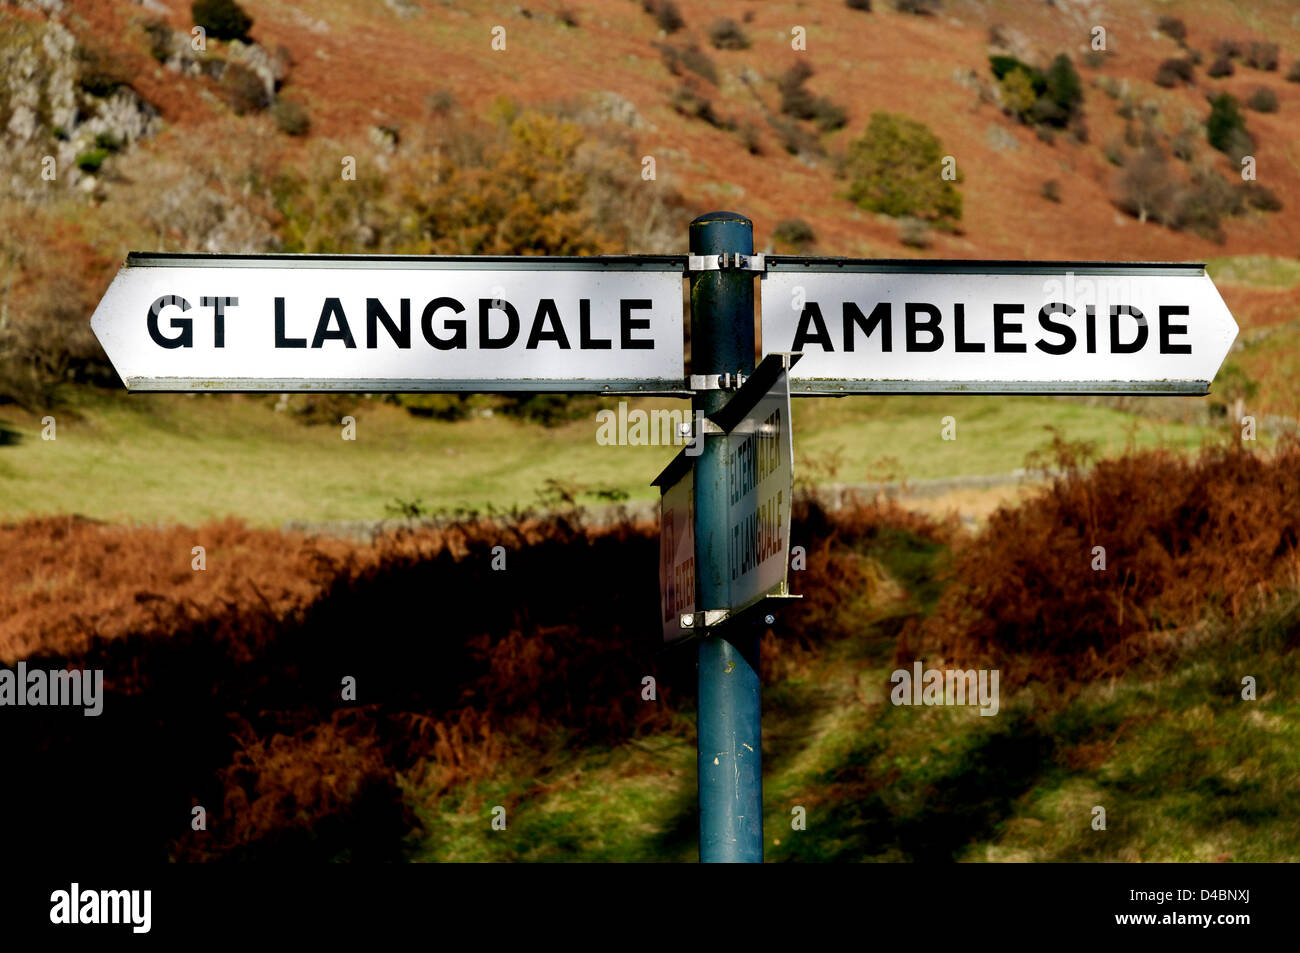 Road signs for Ambleside and Great Langdale in the Lake District Stock Photo